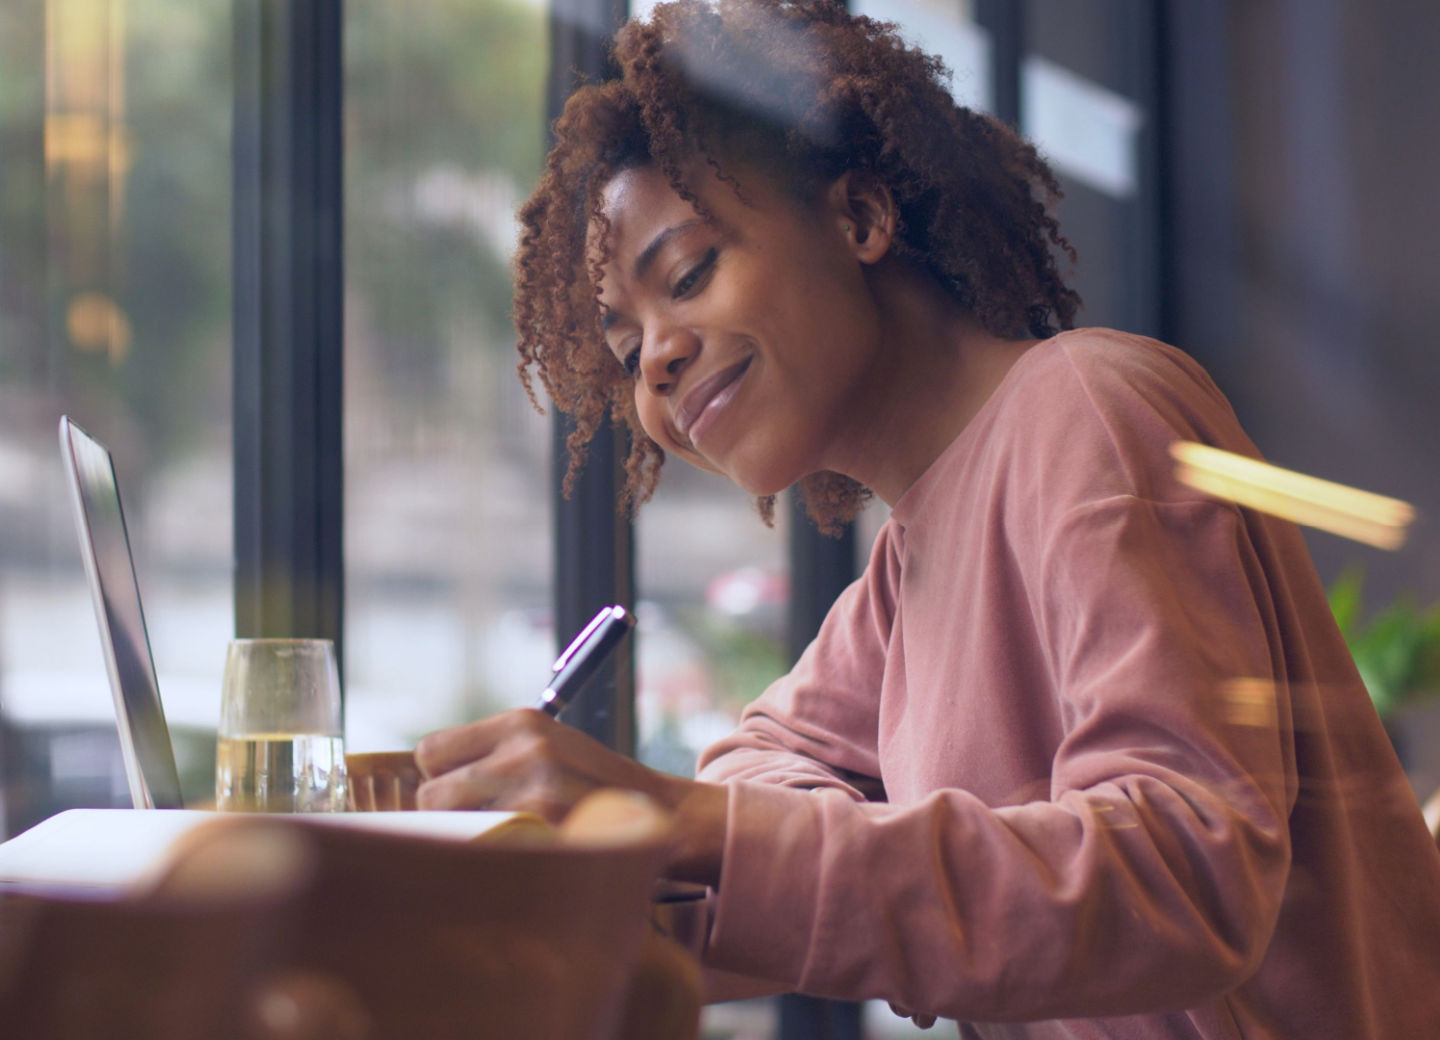 Everyone loves getting a personal letter or note in the mail. If it’s been a while since you wrote a letter, follow these tips at Newsroom.Domtar.com. Image: Black woman in pink shirt, writing letter at desk in front of computer.